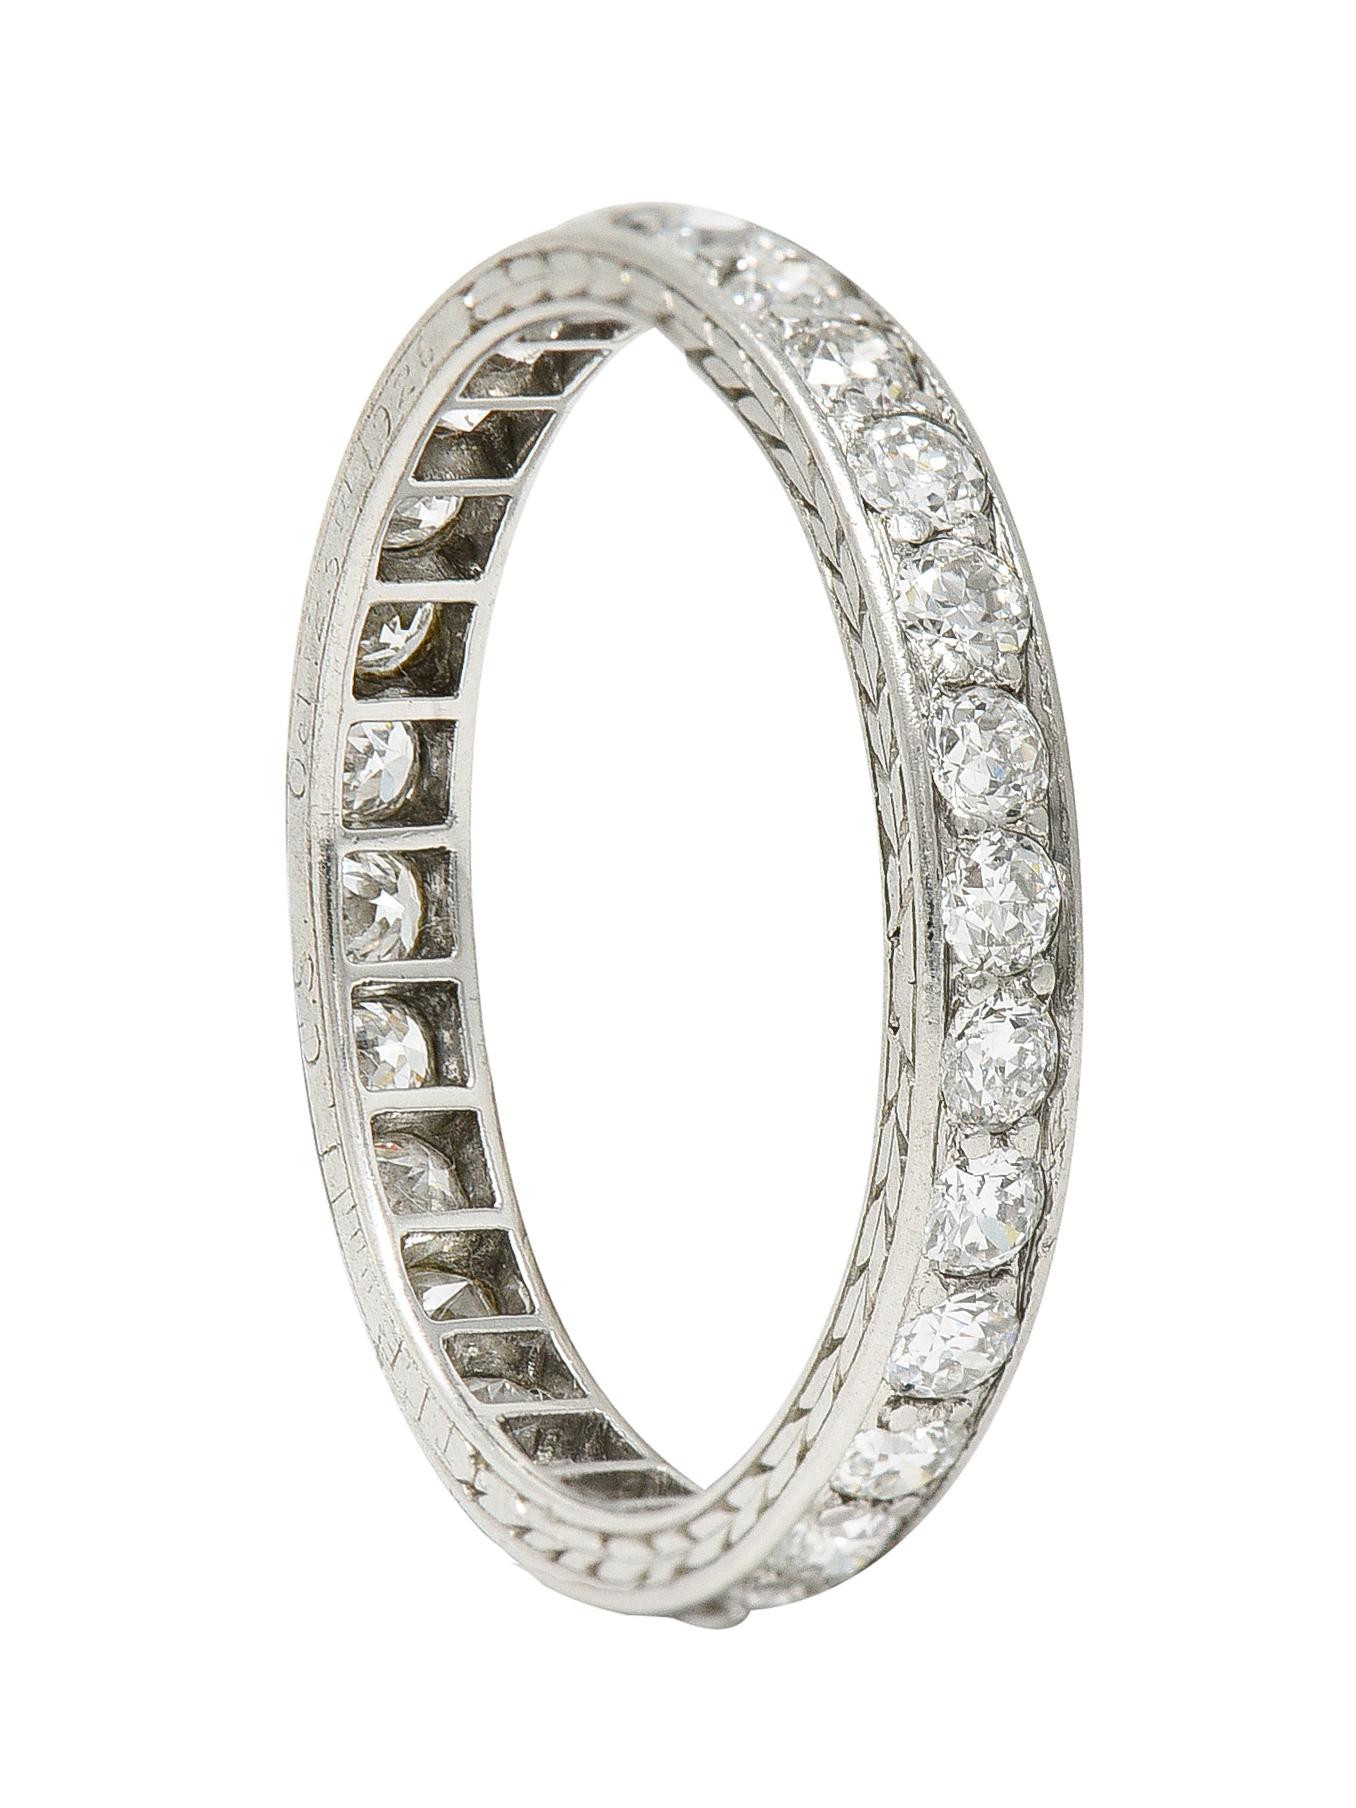 Band ring features bead set old European cut diamonds fully around

Weighing approximately 0.84 carat total - H in color with VS clarity

With engraved wheat motif profile and inscribed 'C.S Oct. 23rd 2926'

Tested as platinum

Signed J.E Caldwell